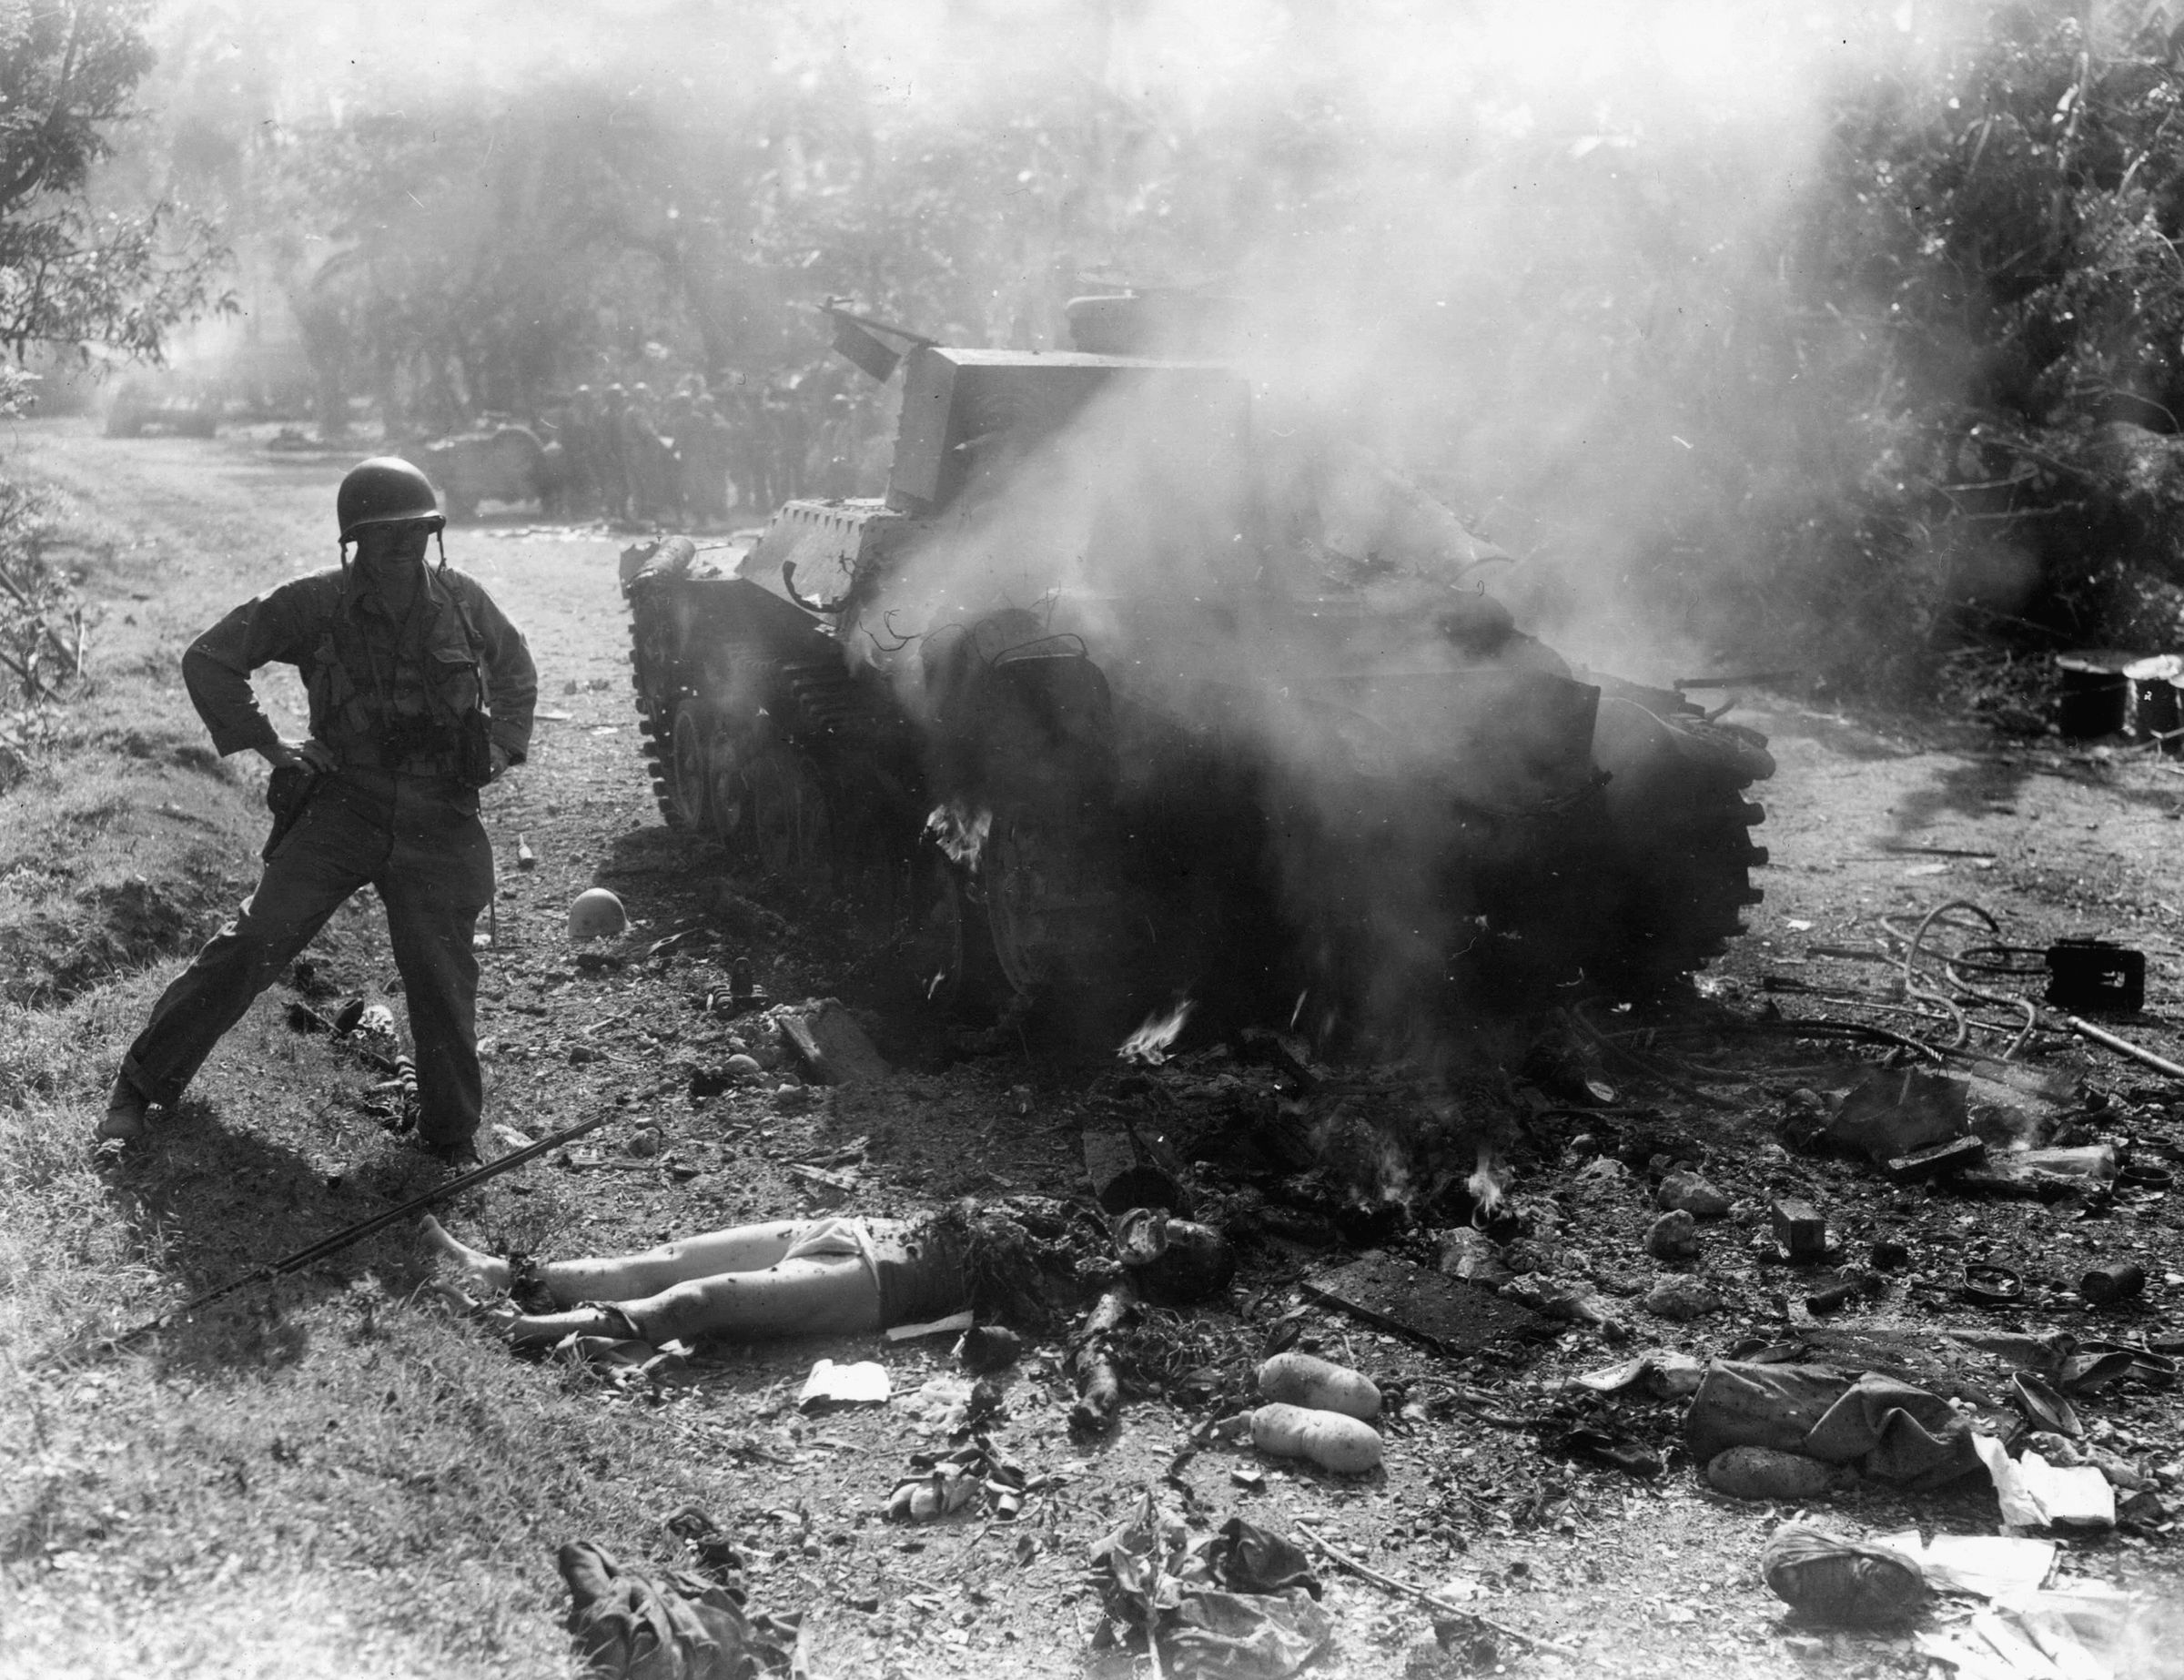 A Japanese tank, knocked out by infantrymen of the 43rd Division, smolders on a dirt road on January 17, 1945.